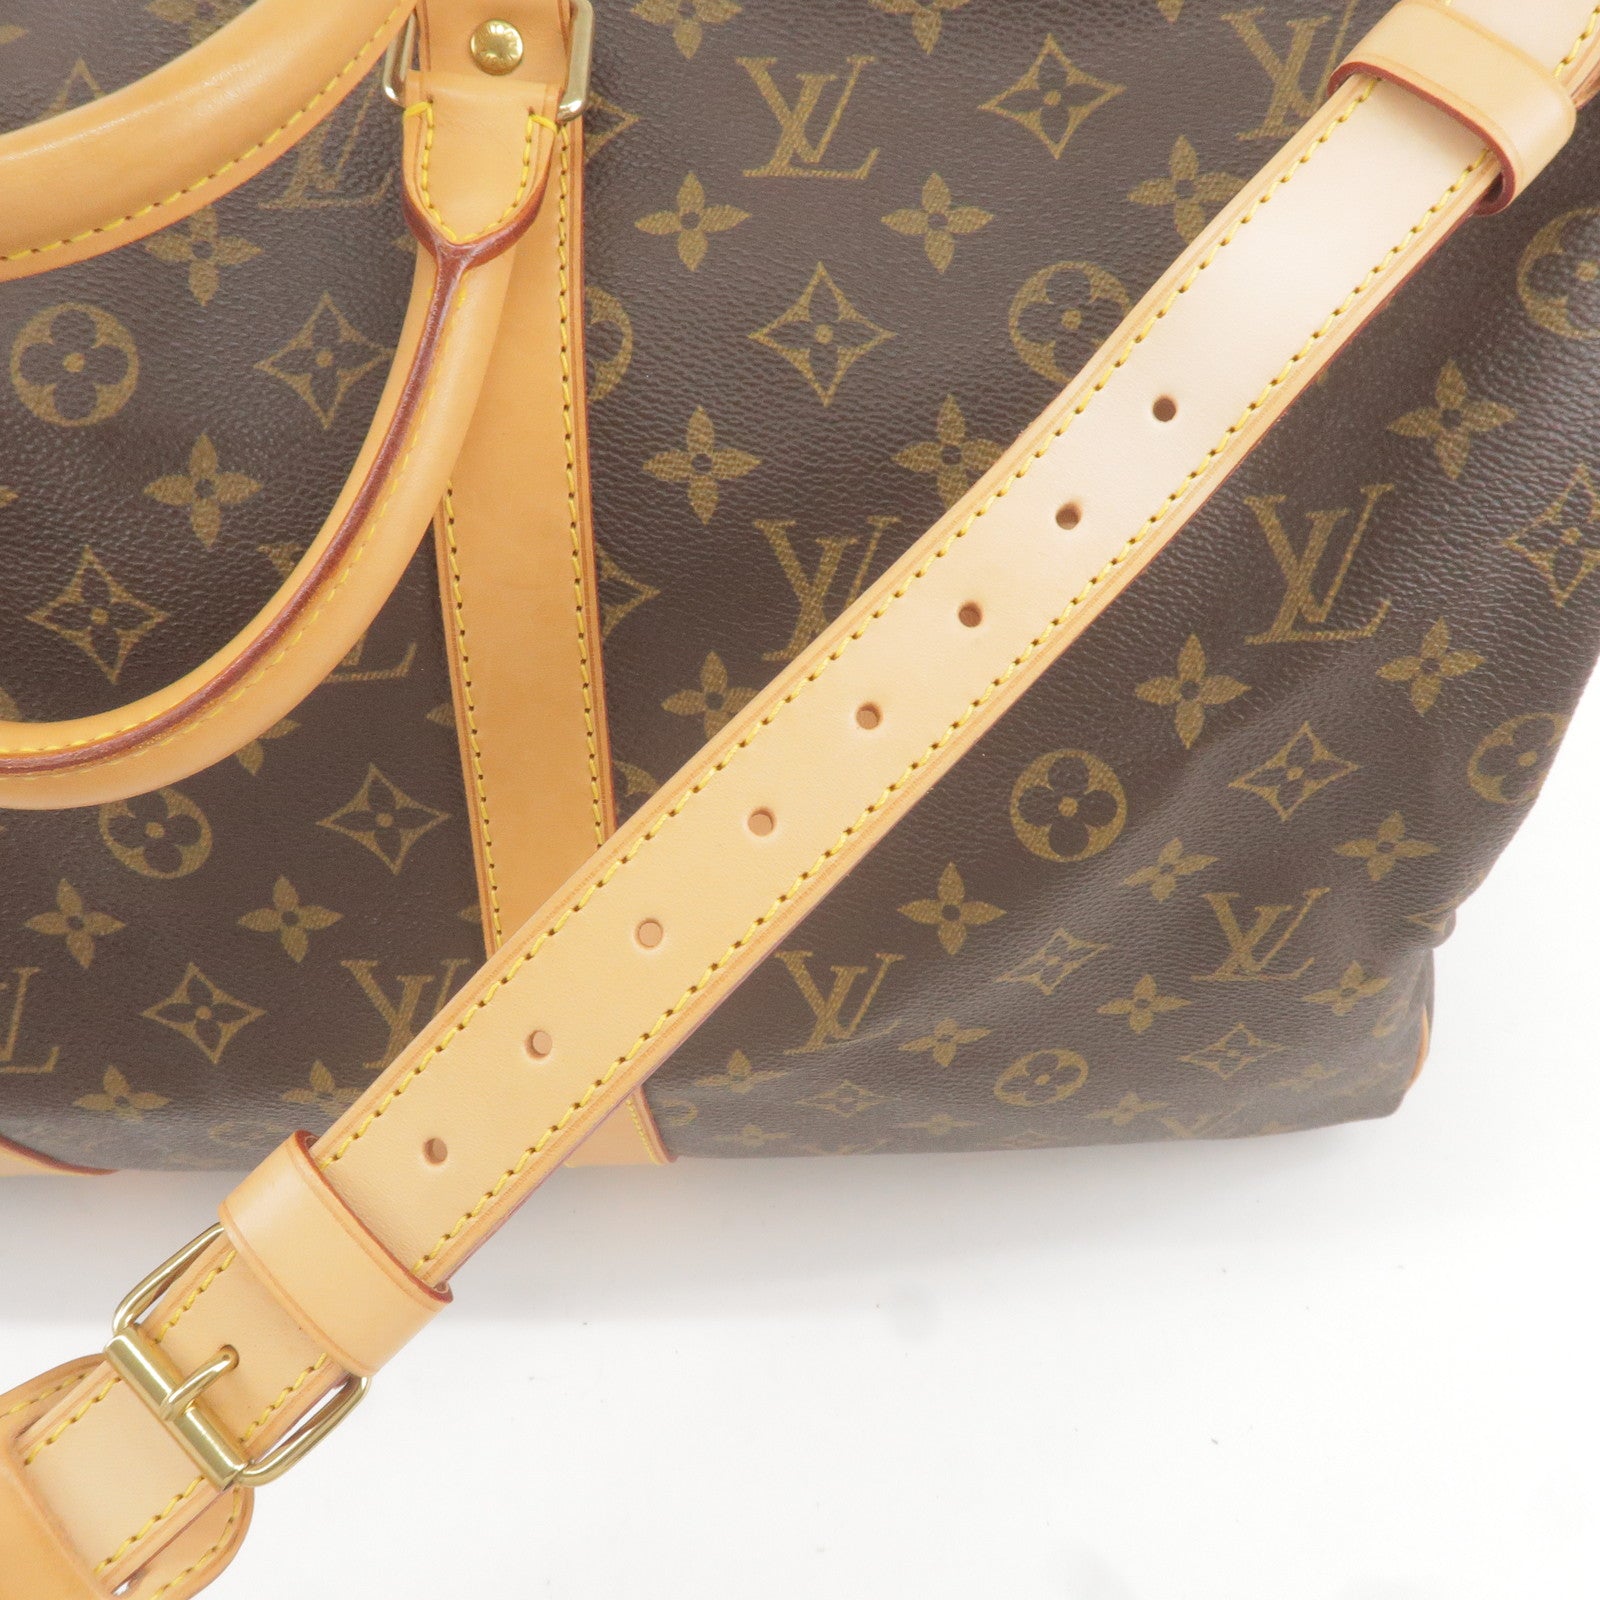 Louis Vuitton 2007 Pre-Owned Beverly mm Shoulder Bag - Brown Size